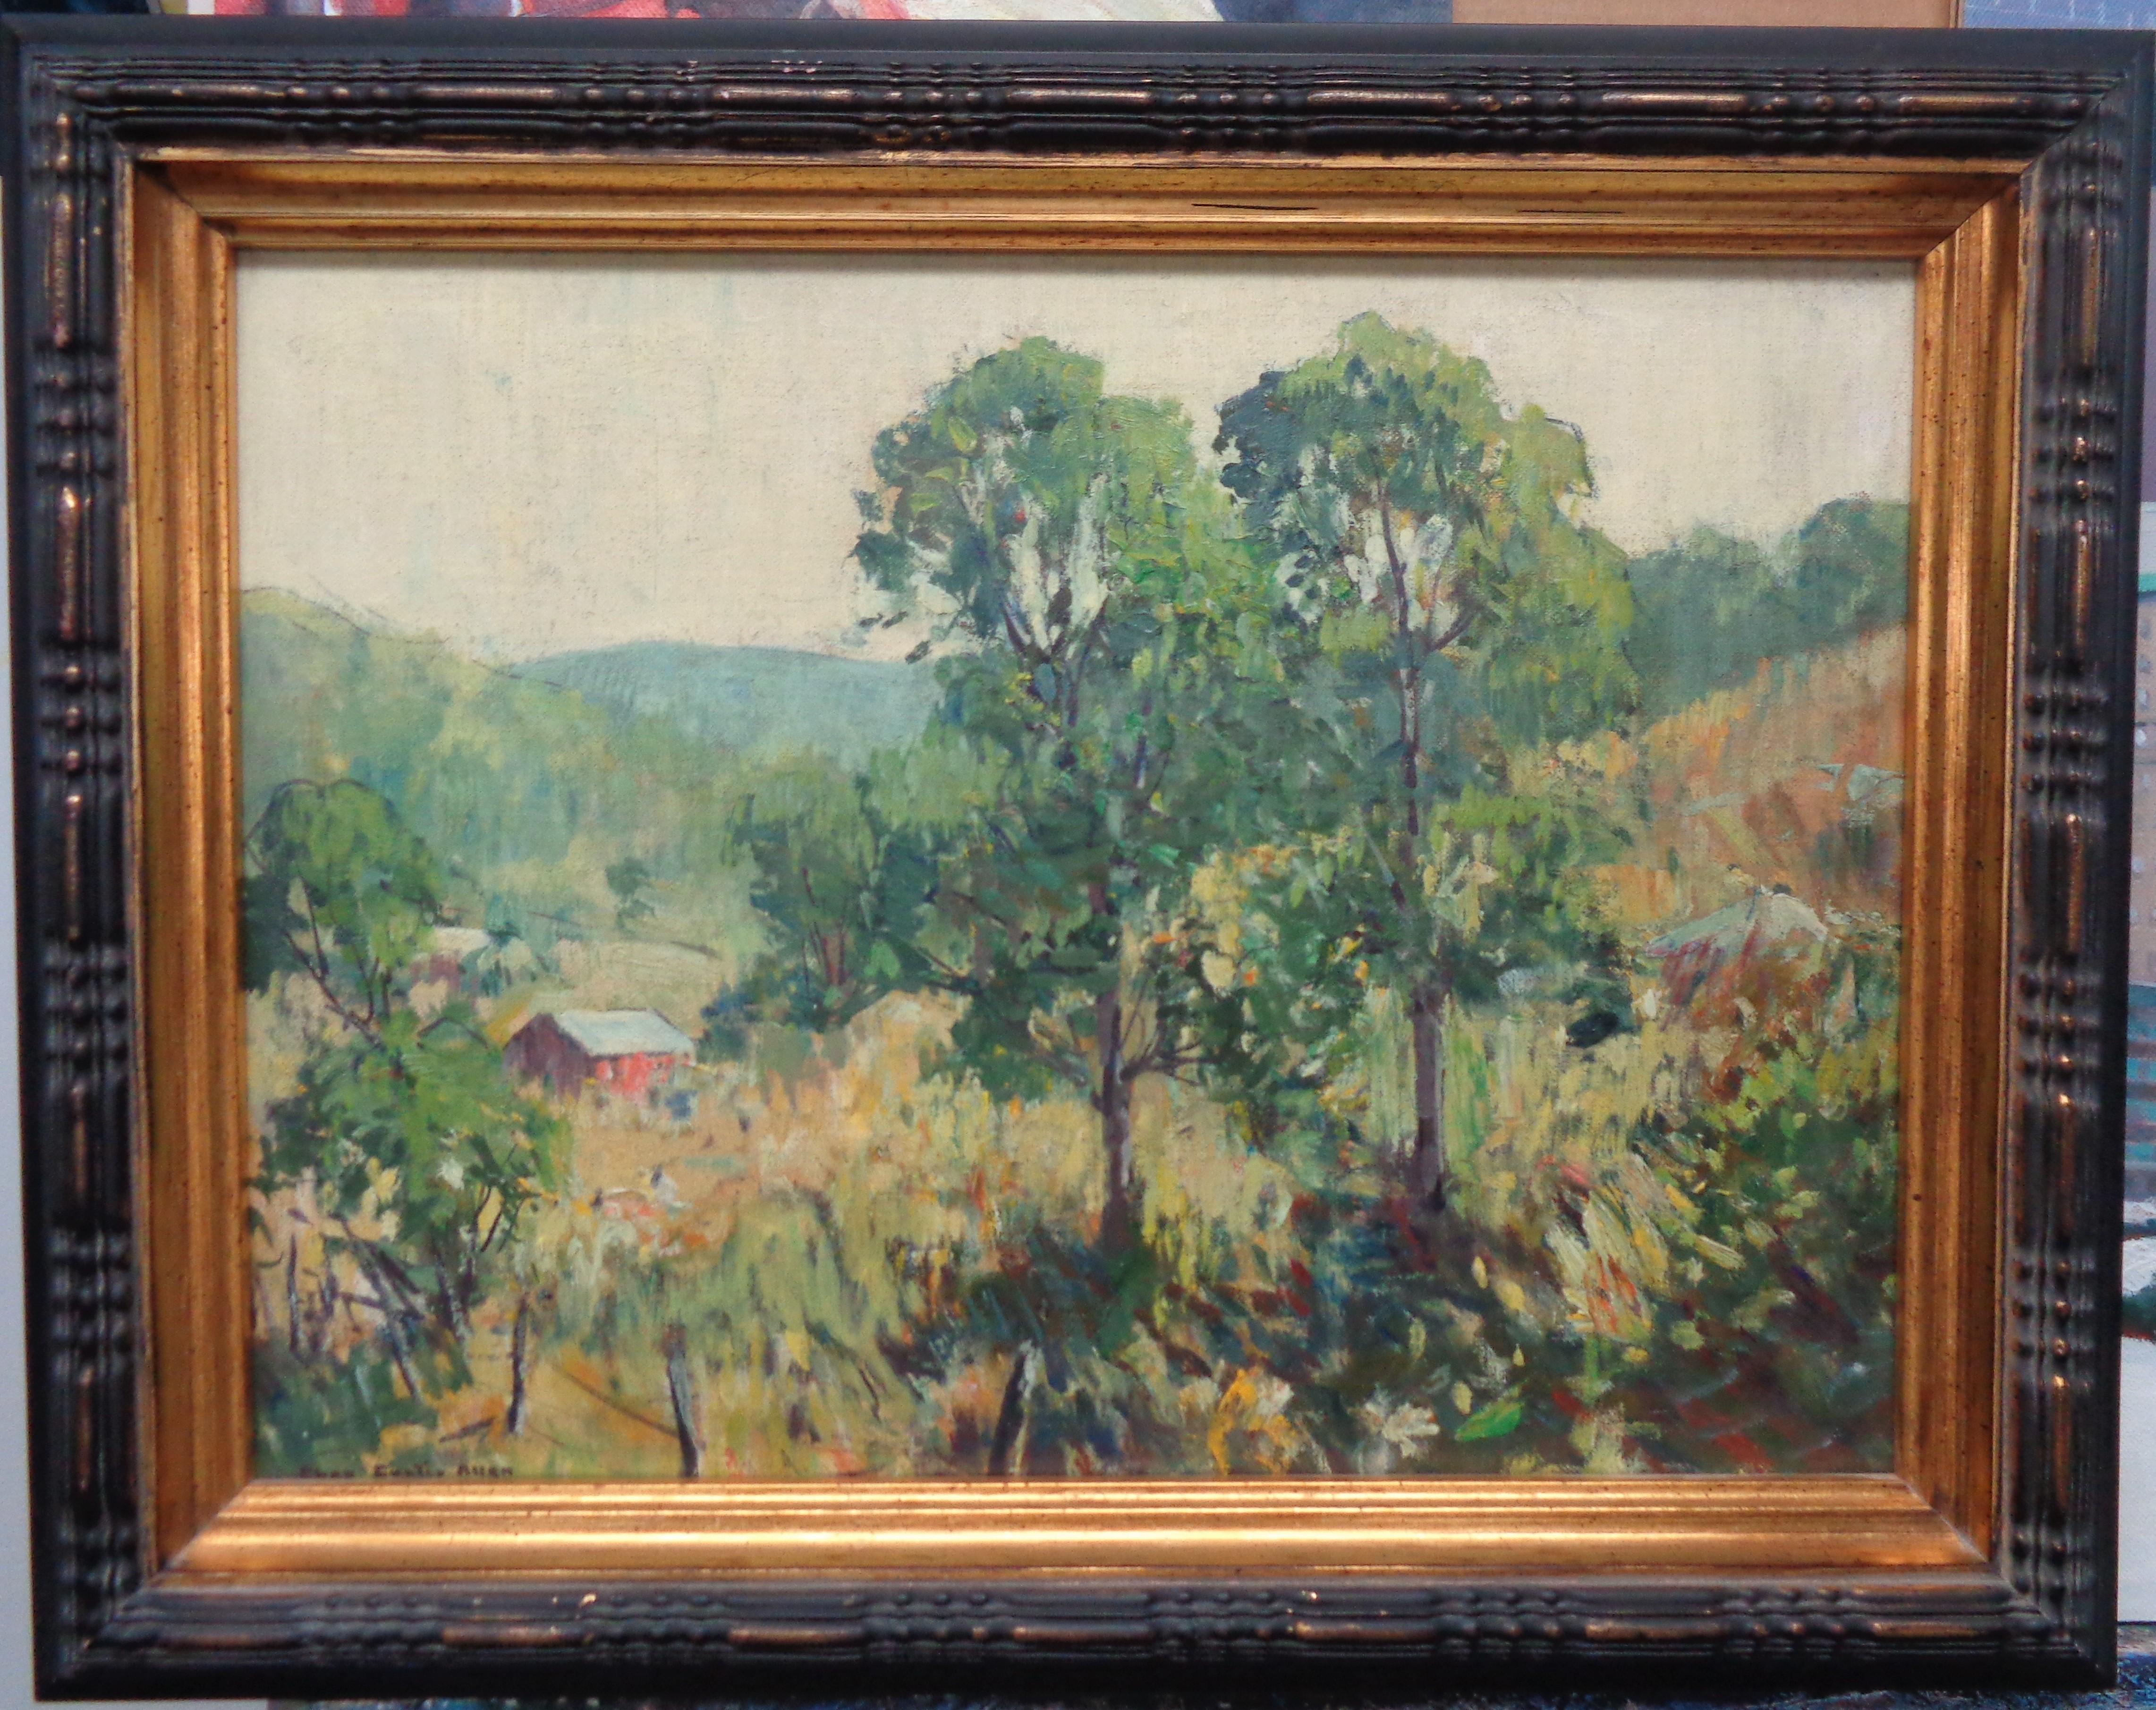 Two Trees
oil/board,  image is 11.13 x 15.13 unframed, could benefit from a cleaning. In as untouched purchased condition. Signed LL.
Brief Biography from ASKART
   Charles Curtis Allen
 was born December 13, 1886 in Waban, Massachusetts and died